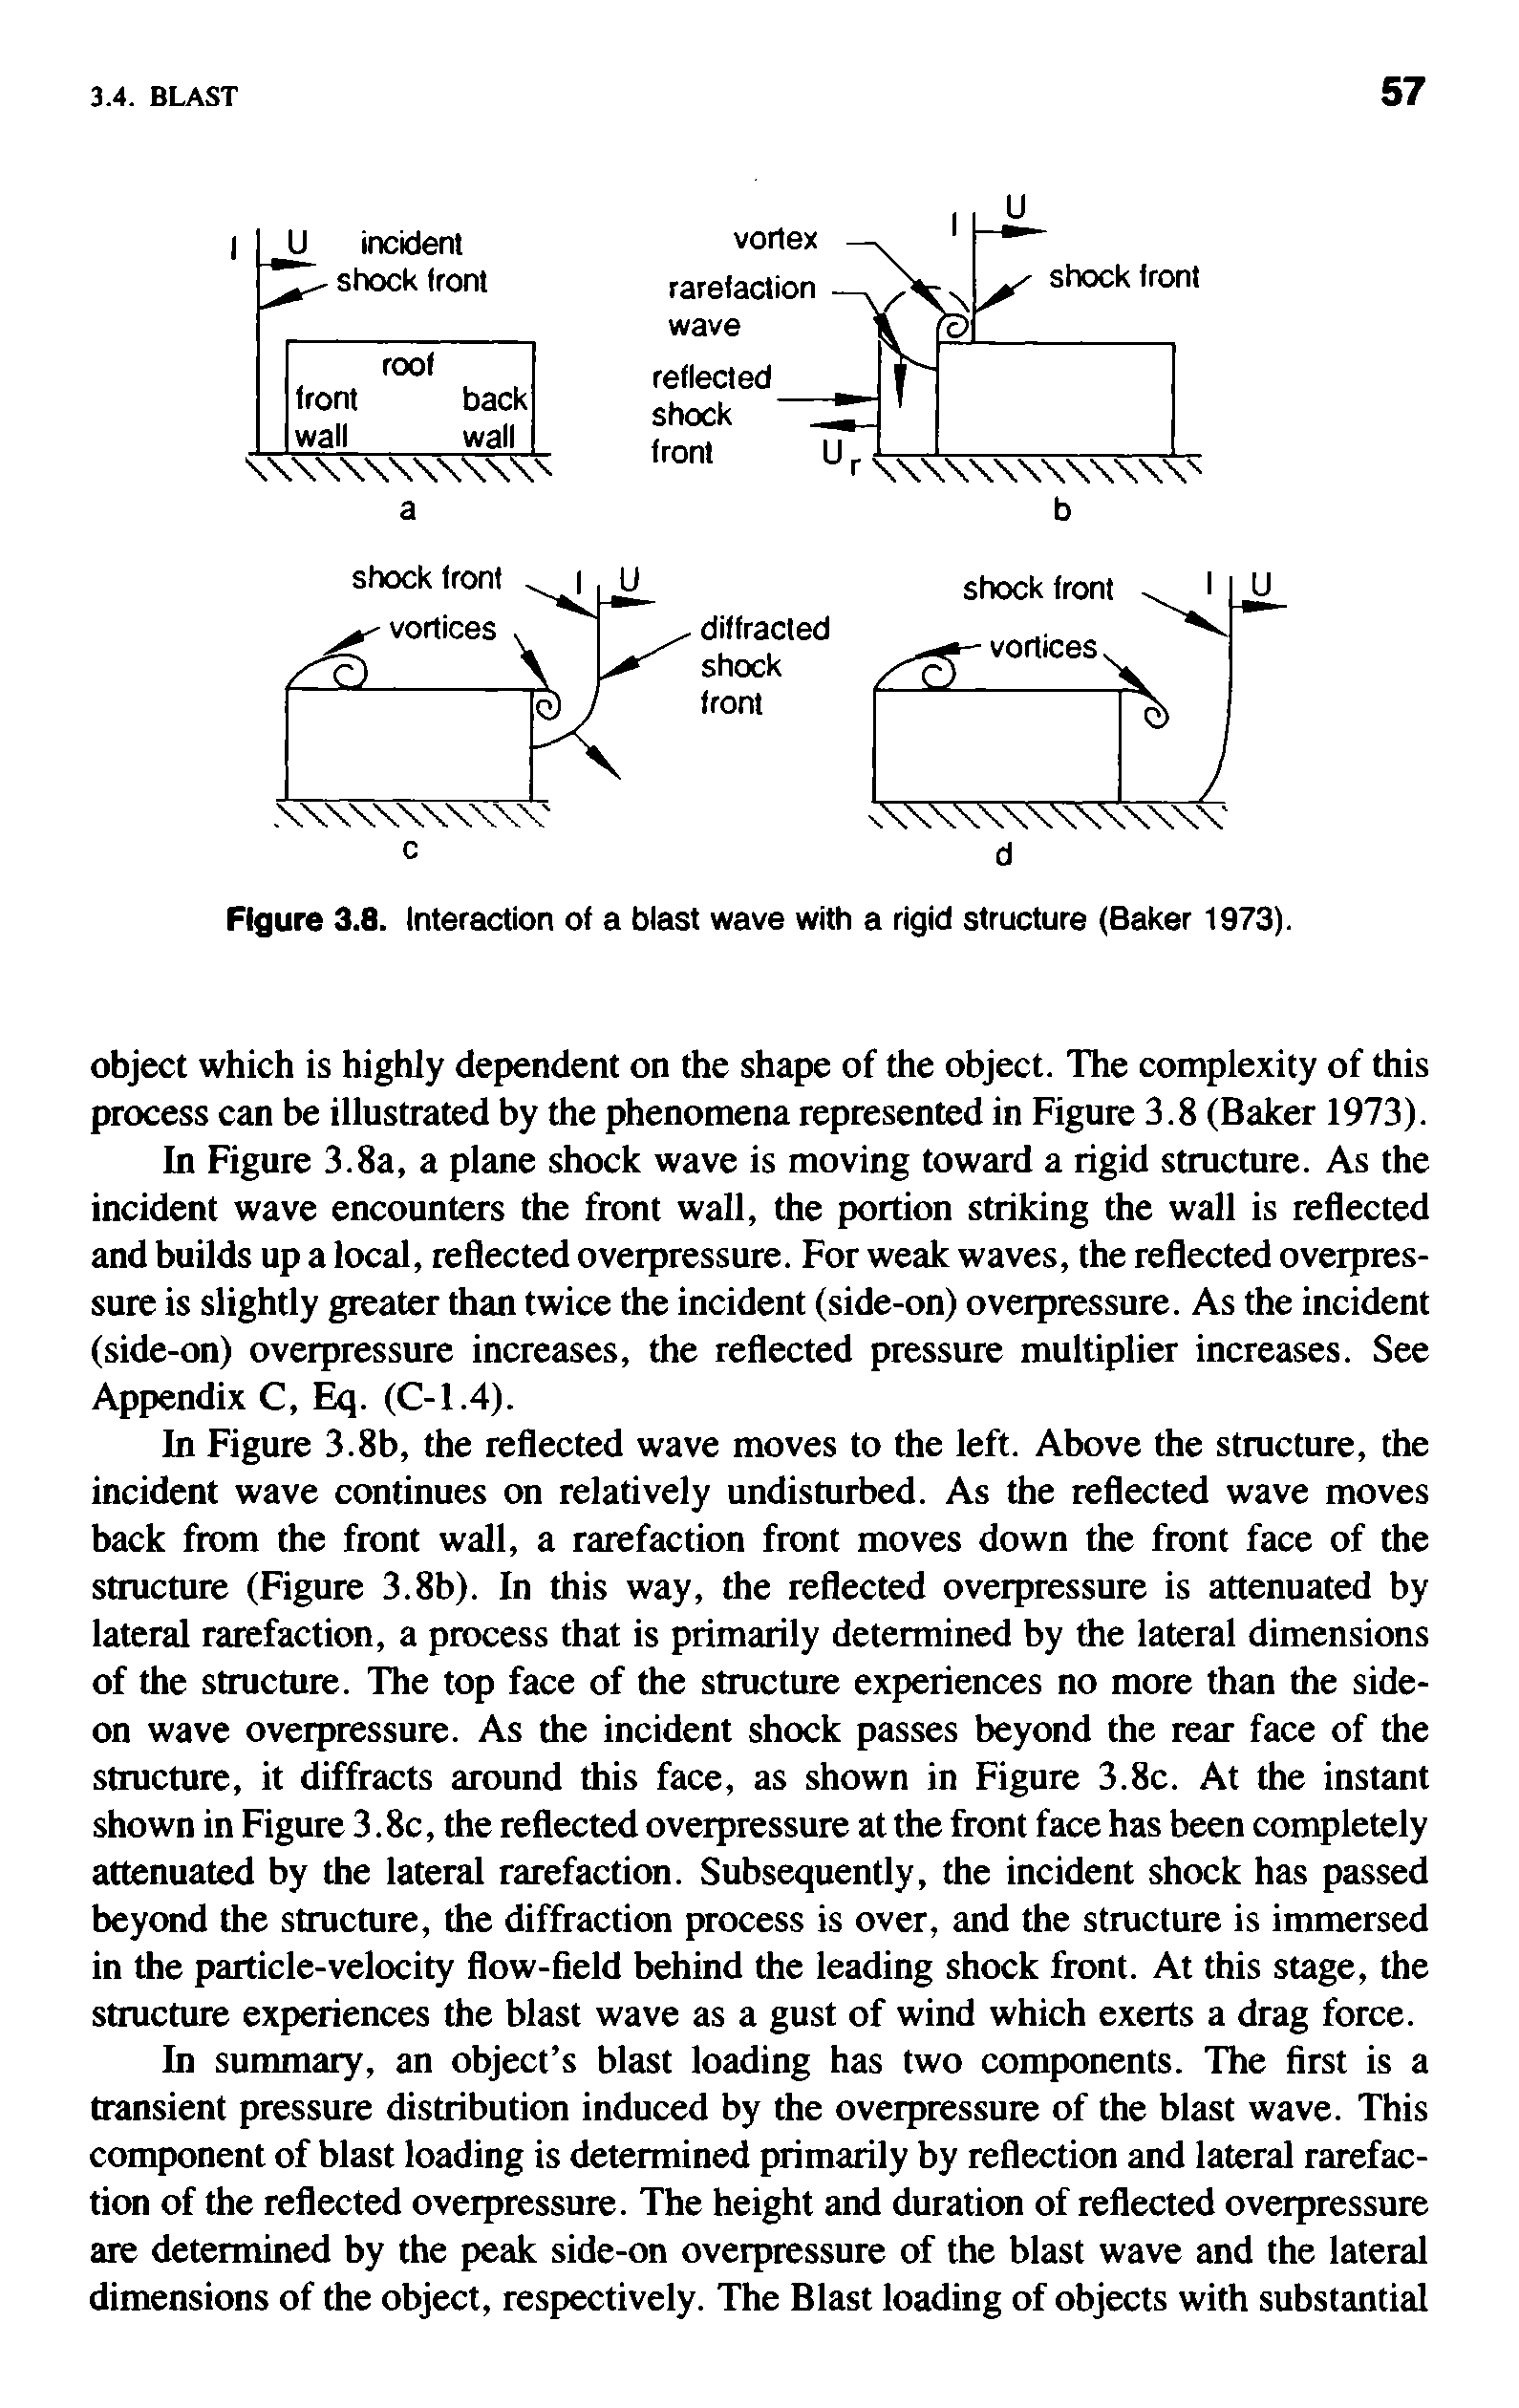 Figure 3.8. Interaction of a blast wave with a rigid structure (Baker 1973).